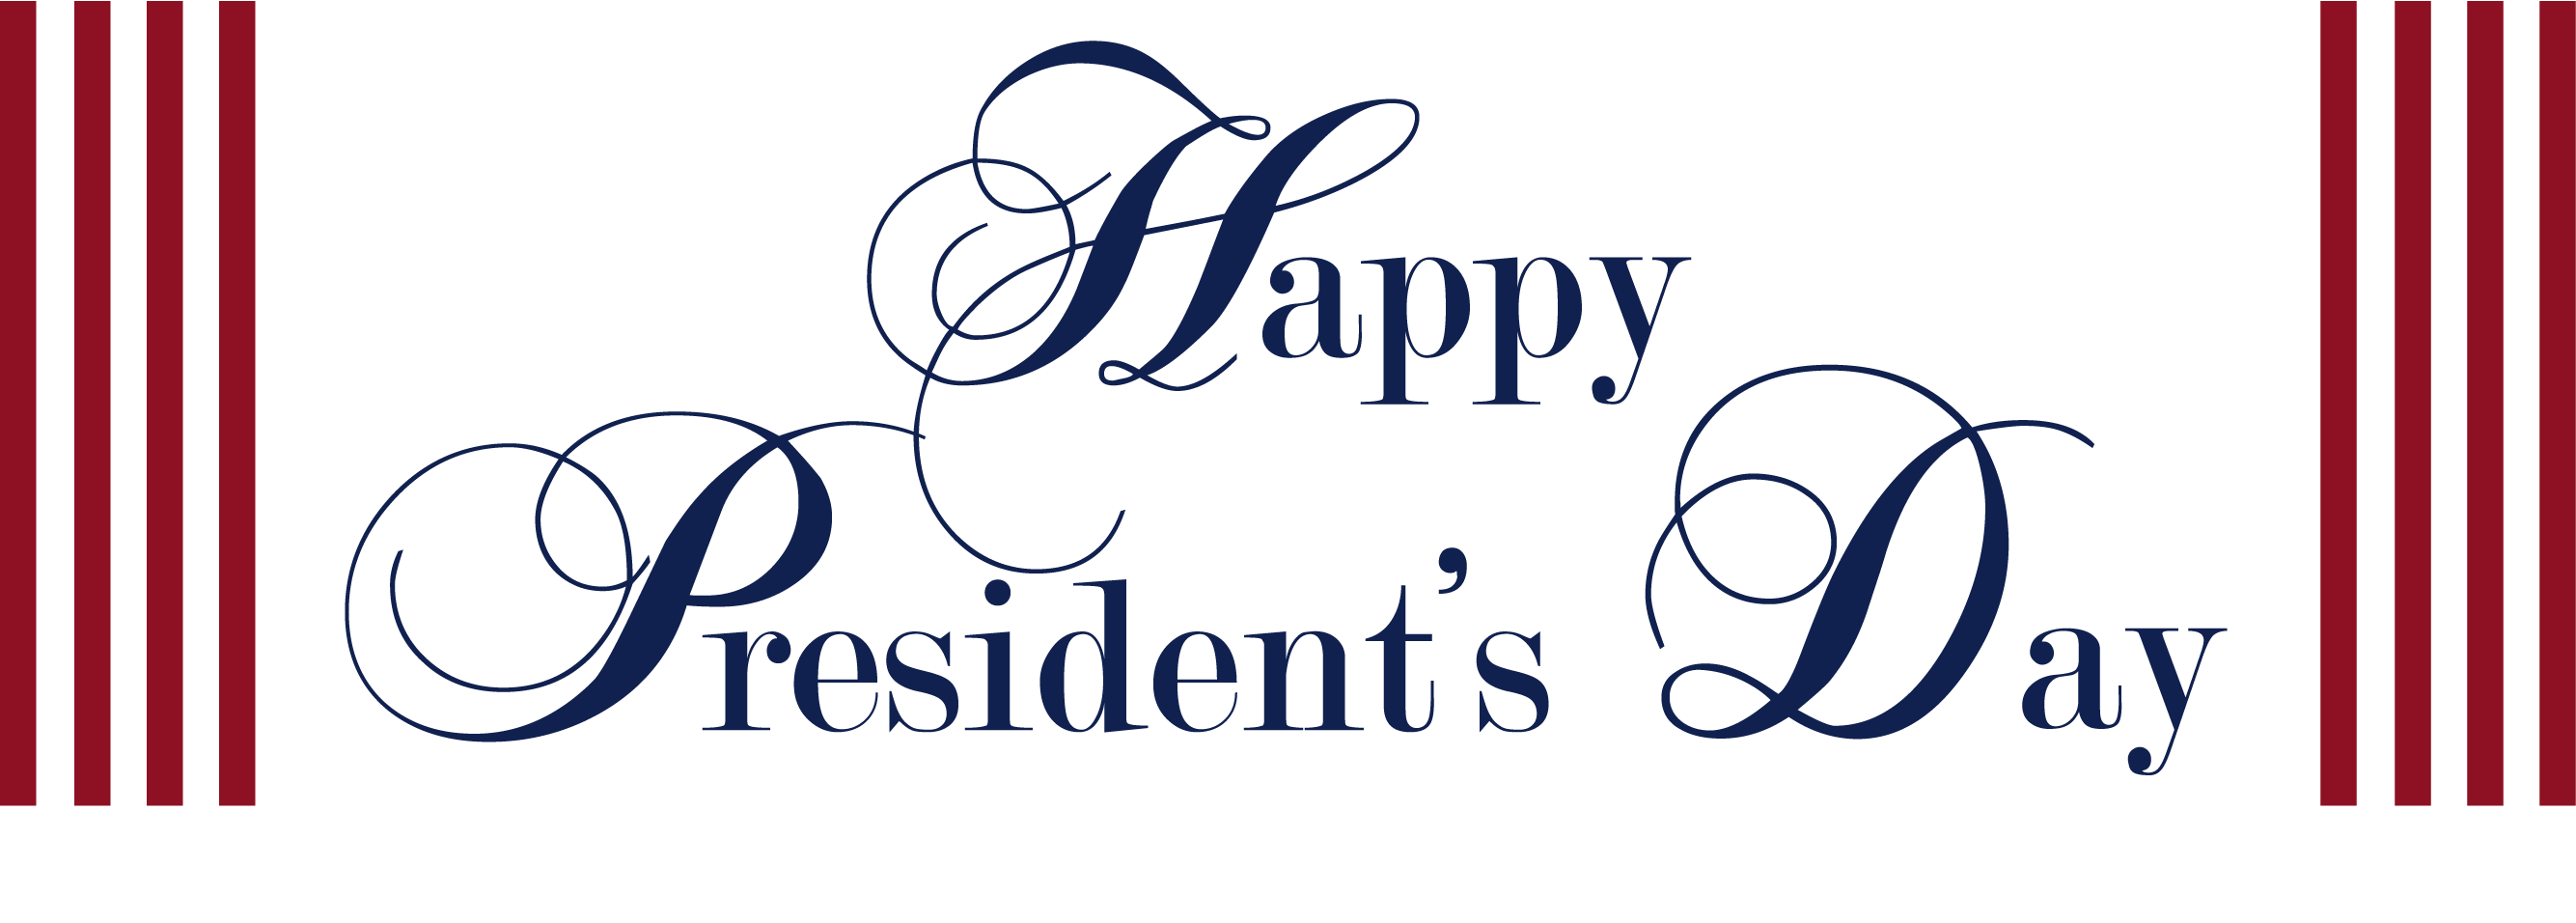 happy clipart presidents day